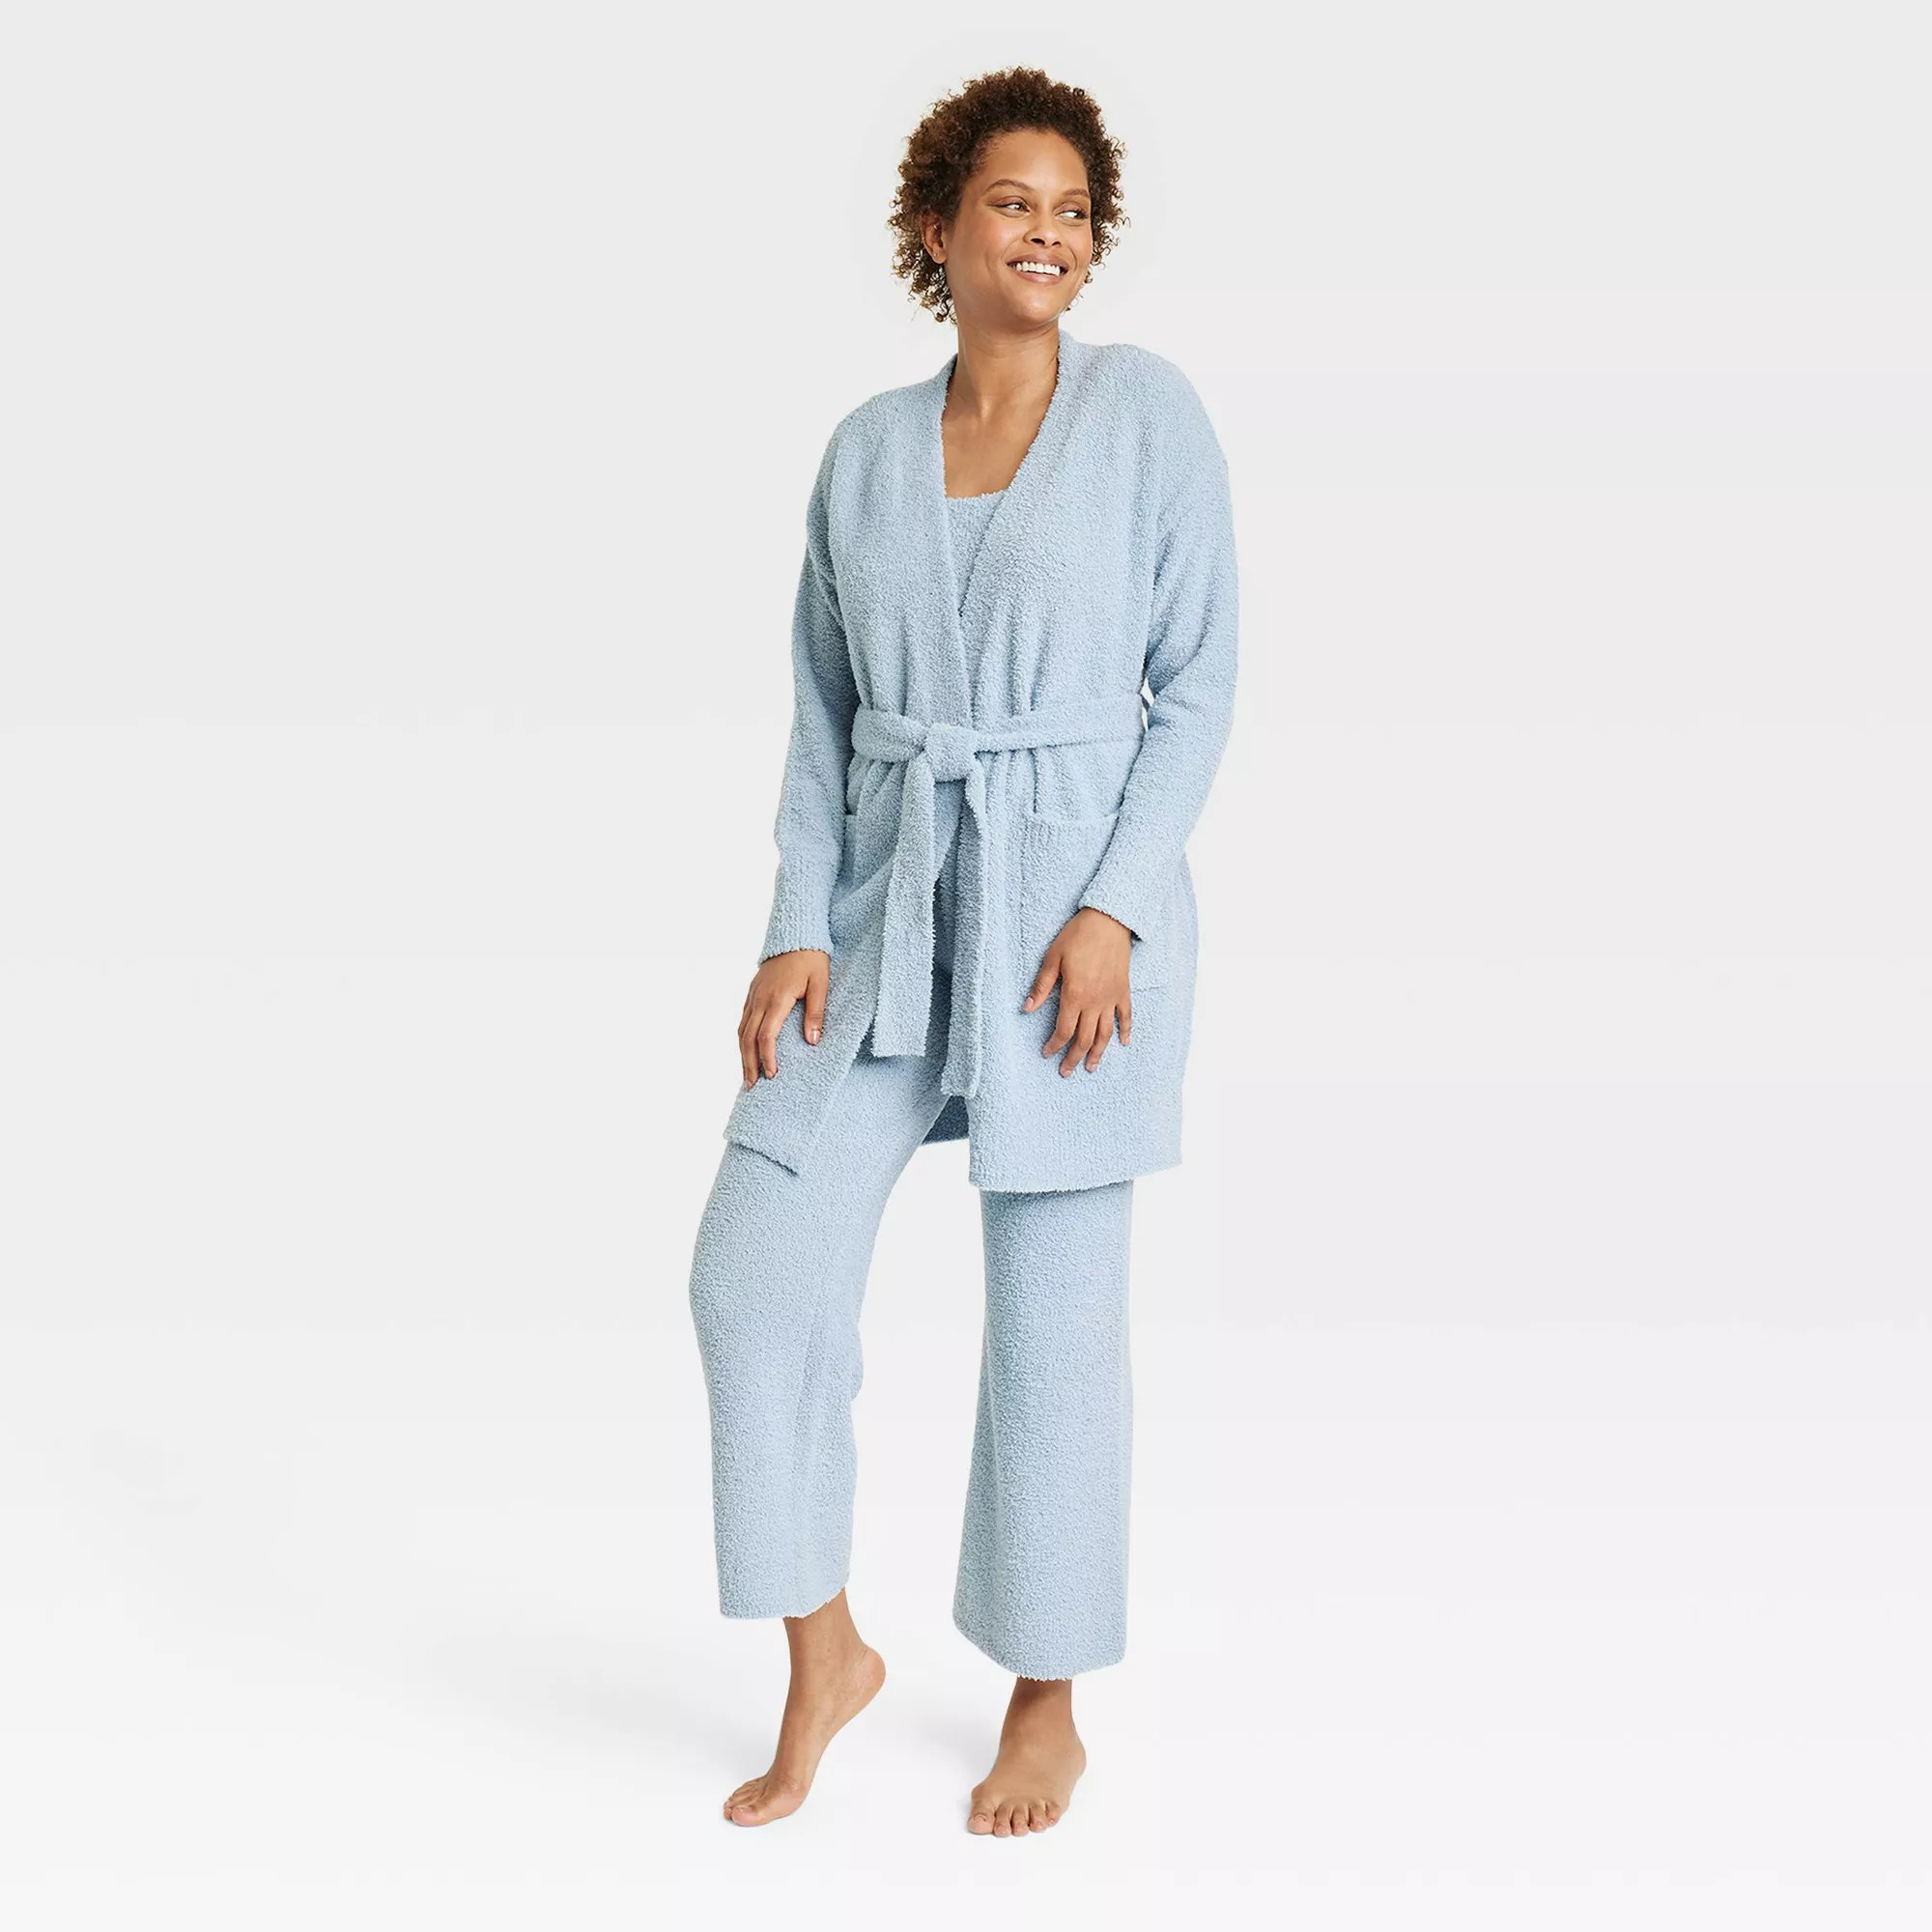 A model wearing the fuzzy tie-waist robe in light blue, with the matching tank and pants under it